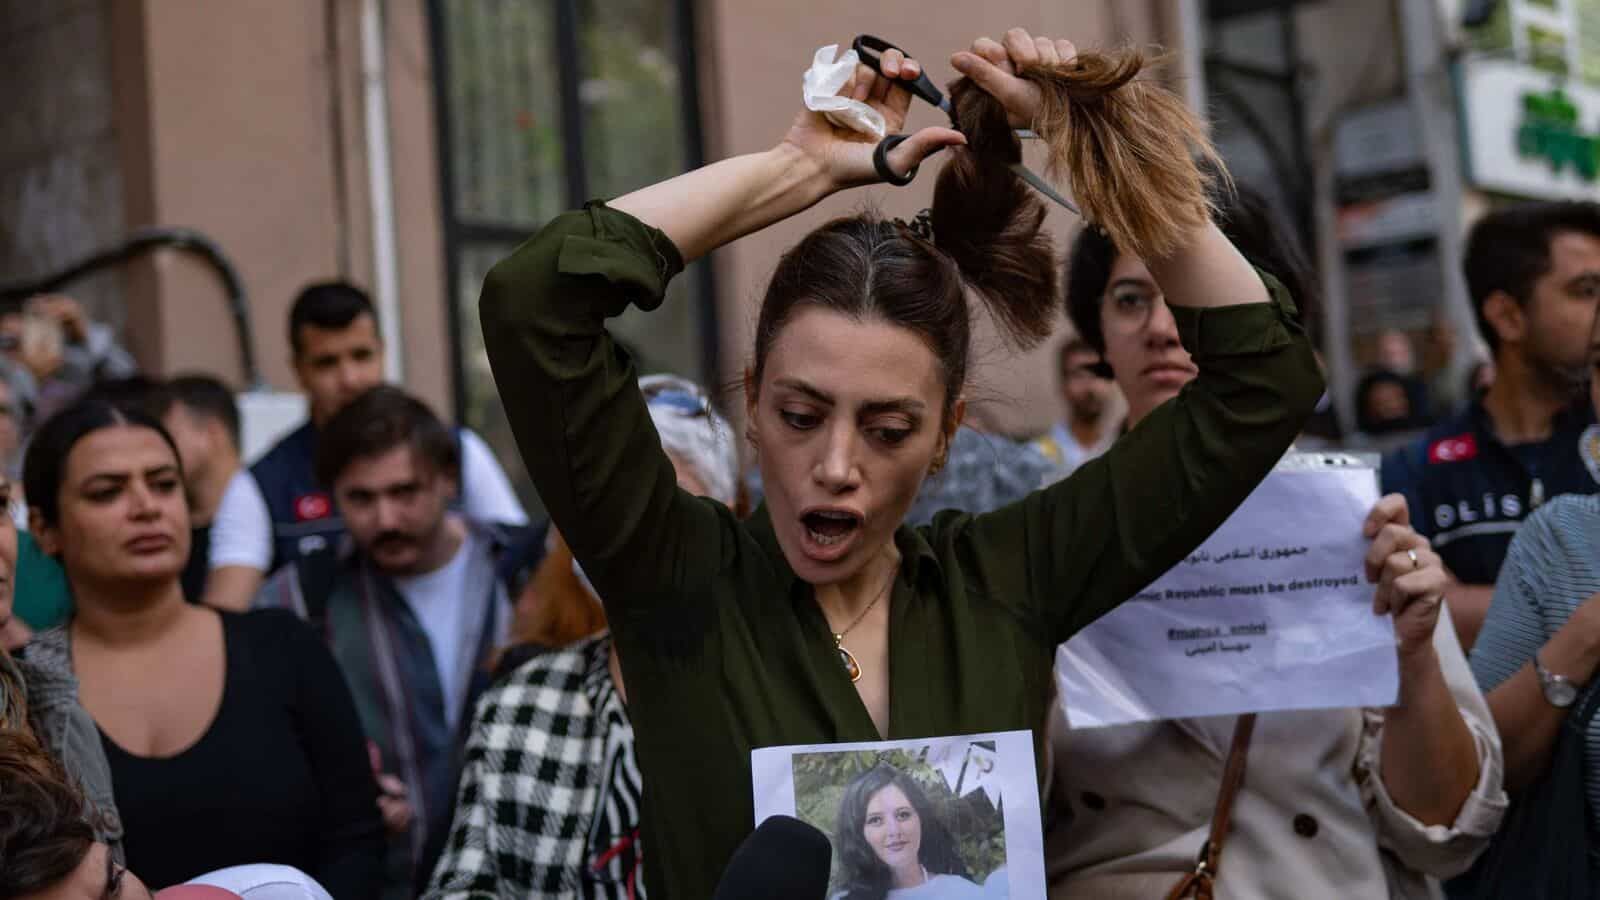 Iran’s supreme leader opens up to relaxing hijab rules after months of protest, executions